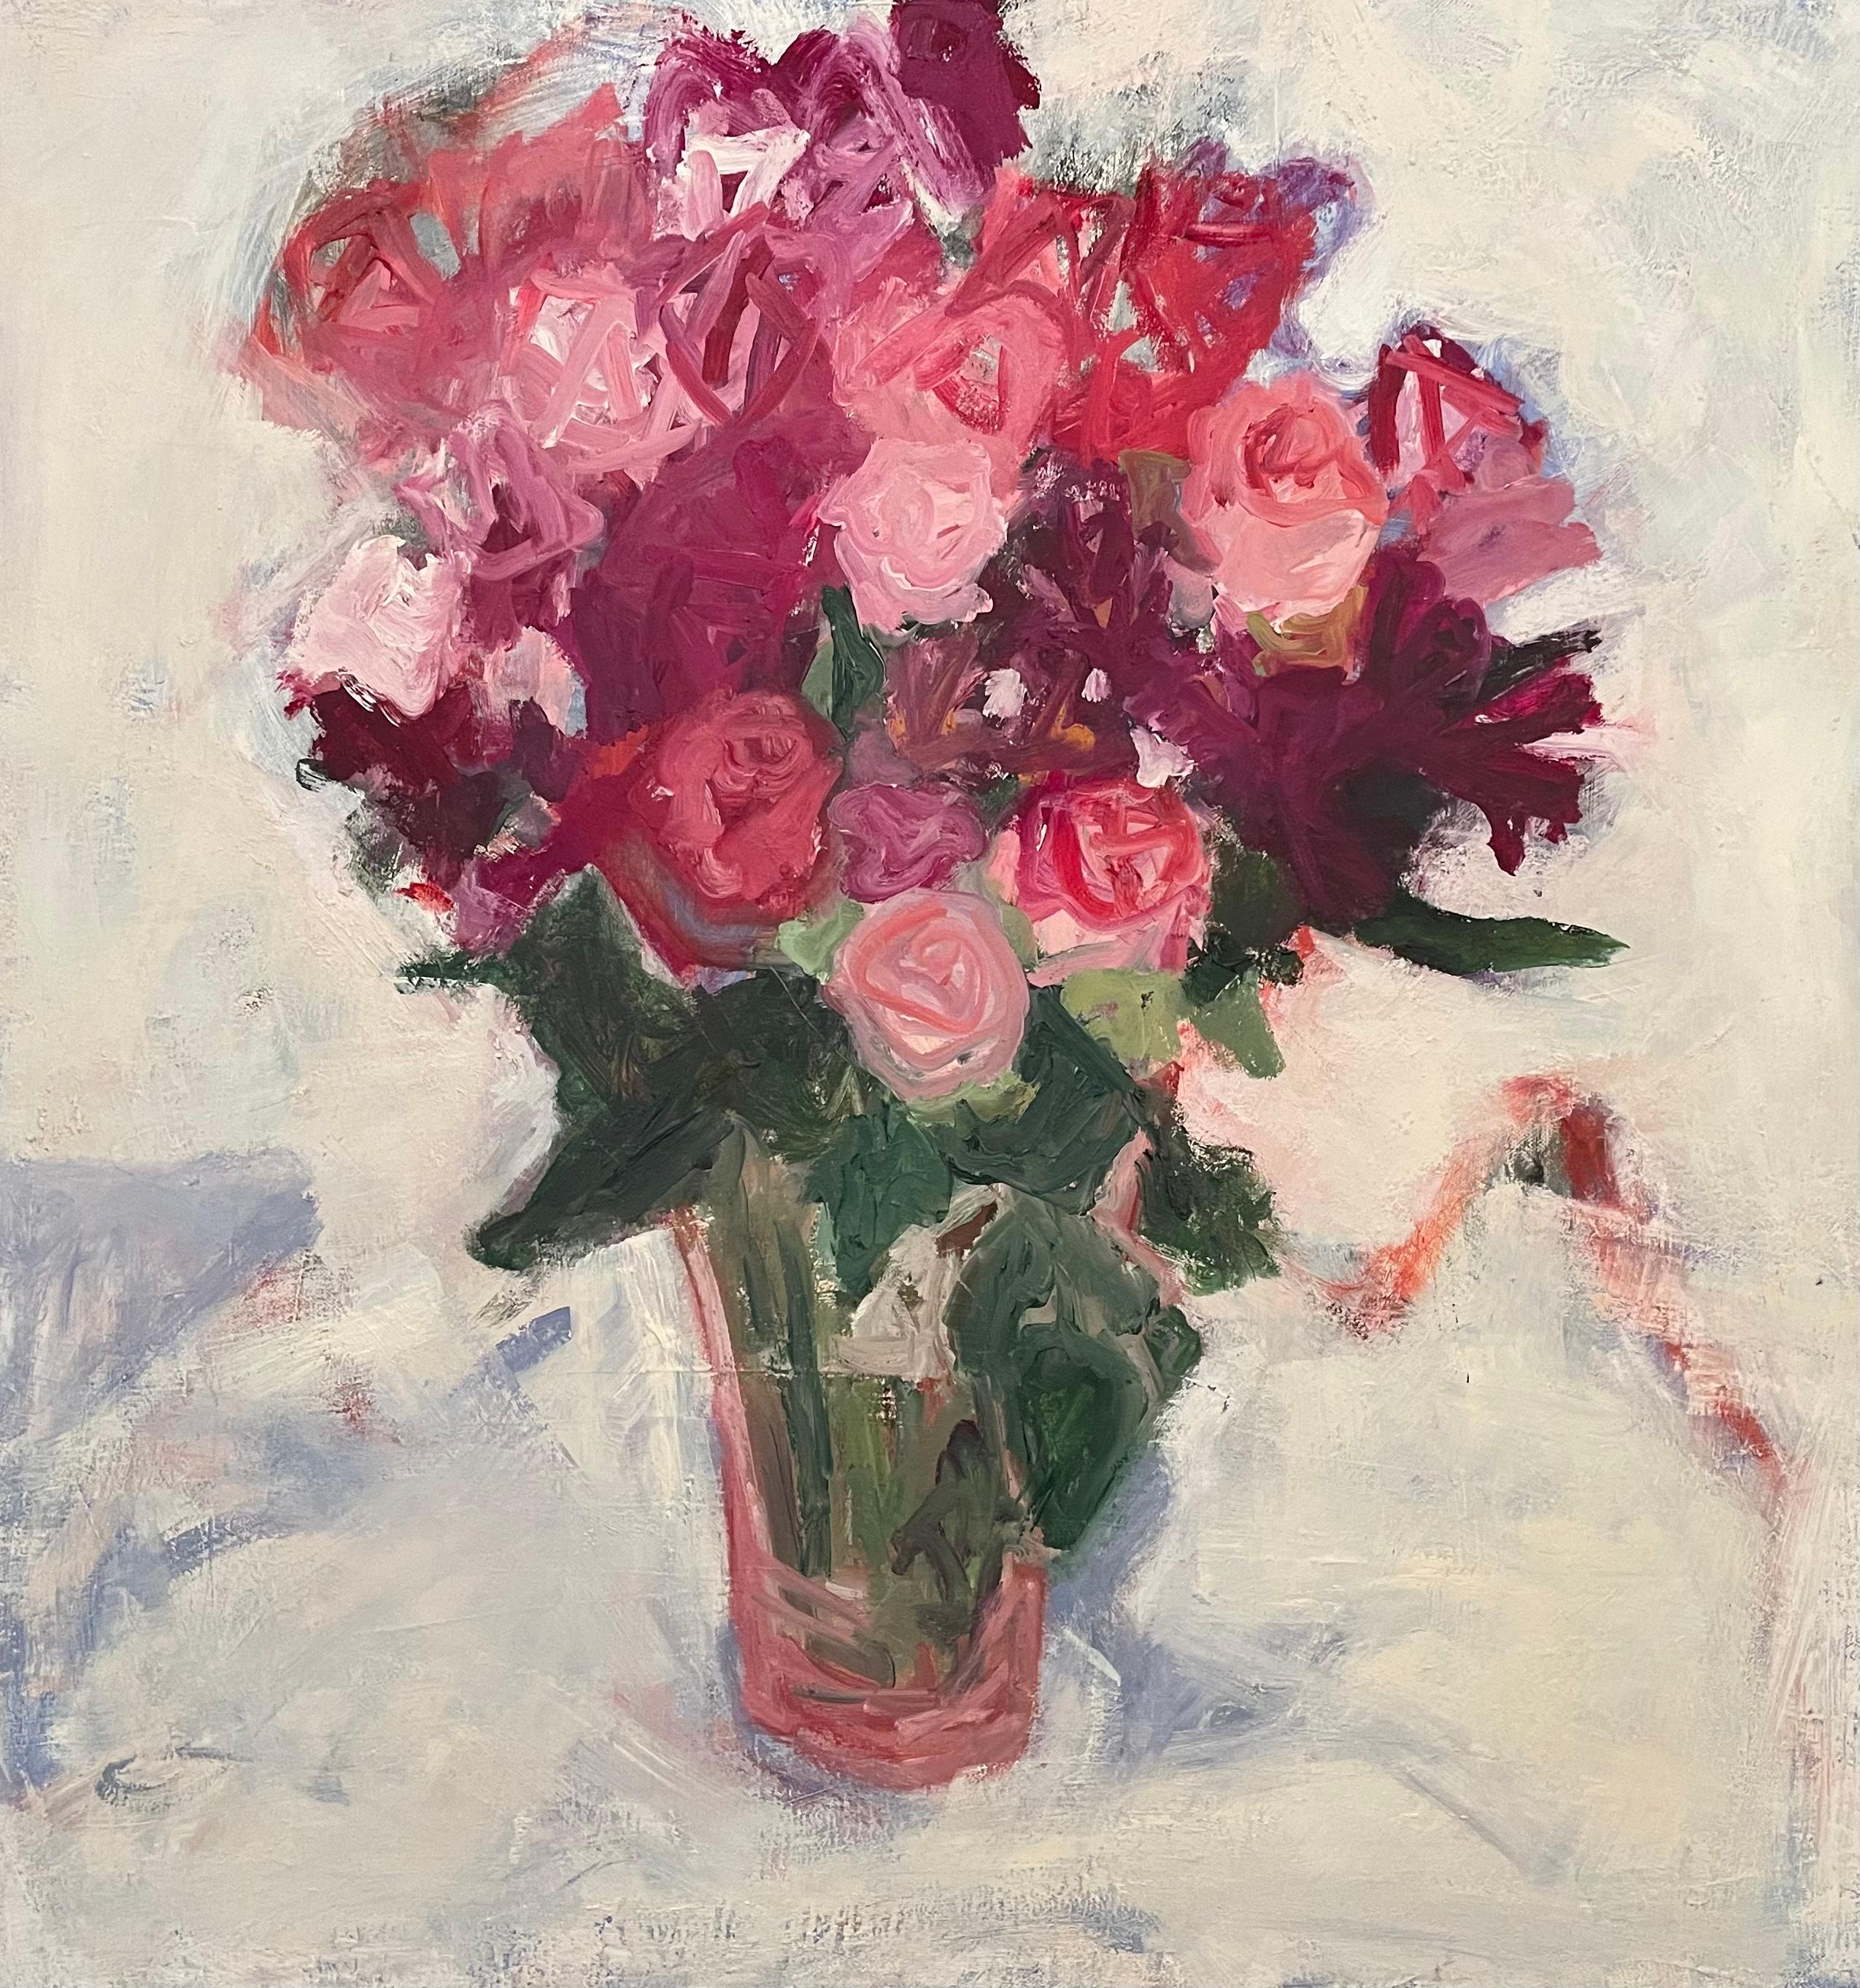 Betsy Podlach's 'Roses' is a vibrant expressionist still-life painting that encapsulates the ephemeral beauty of flowers. The artist employs a bold, impasto technique, where thick applications of paint create a textured surface that adds depth and